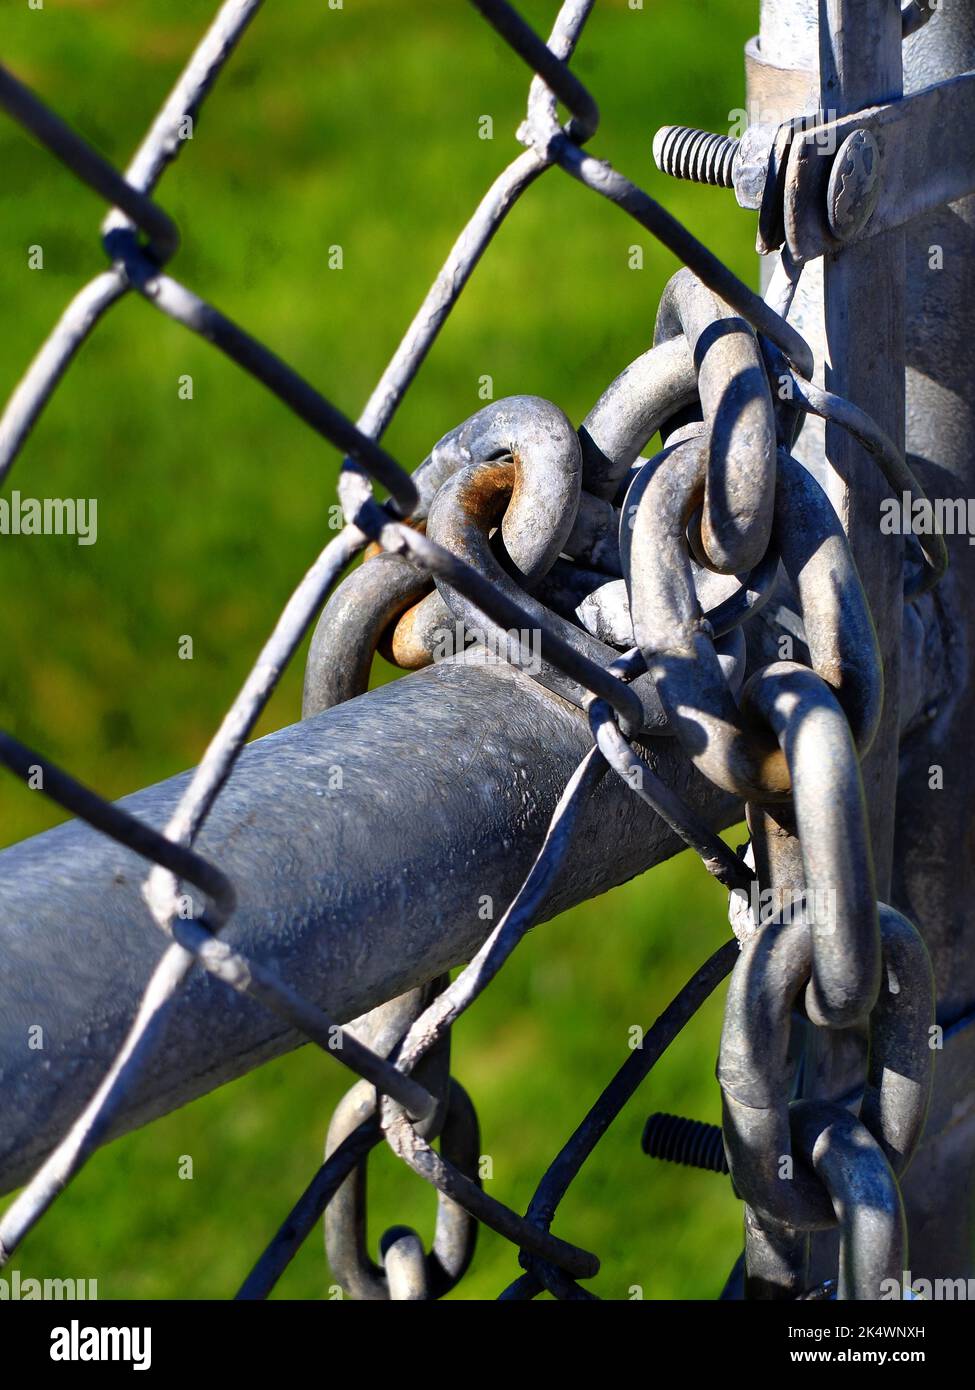 Chain locked on chainlink fence for security Stock Photo